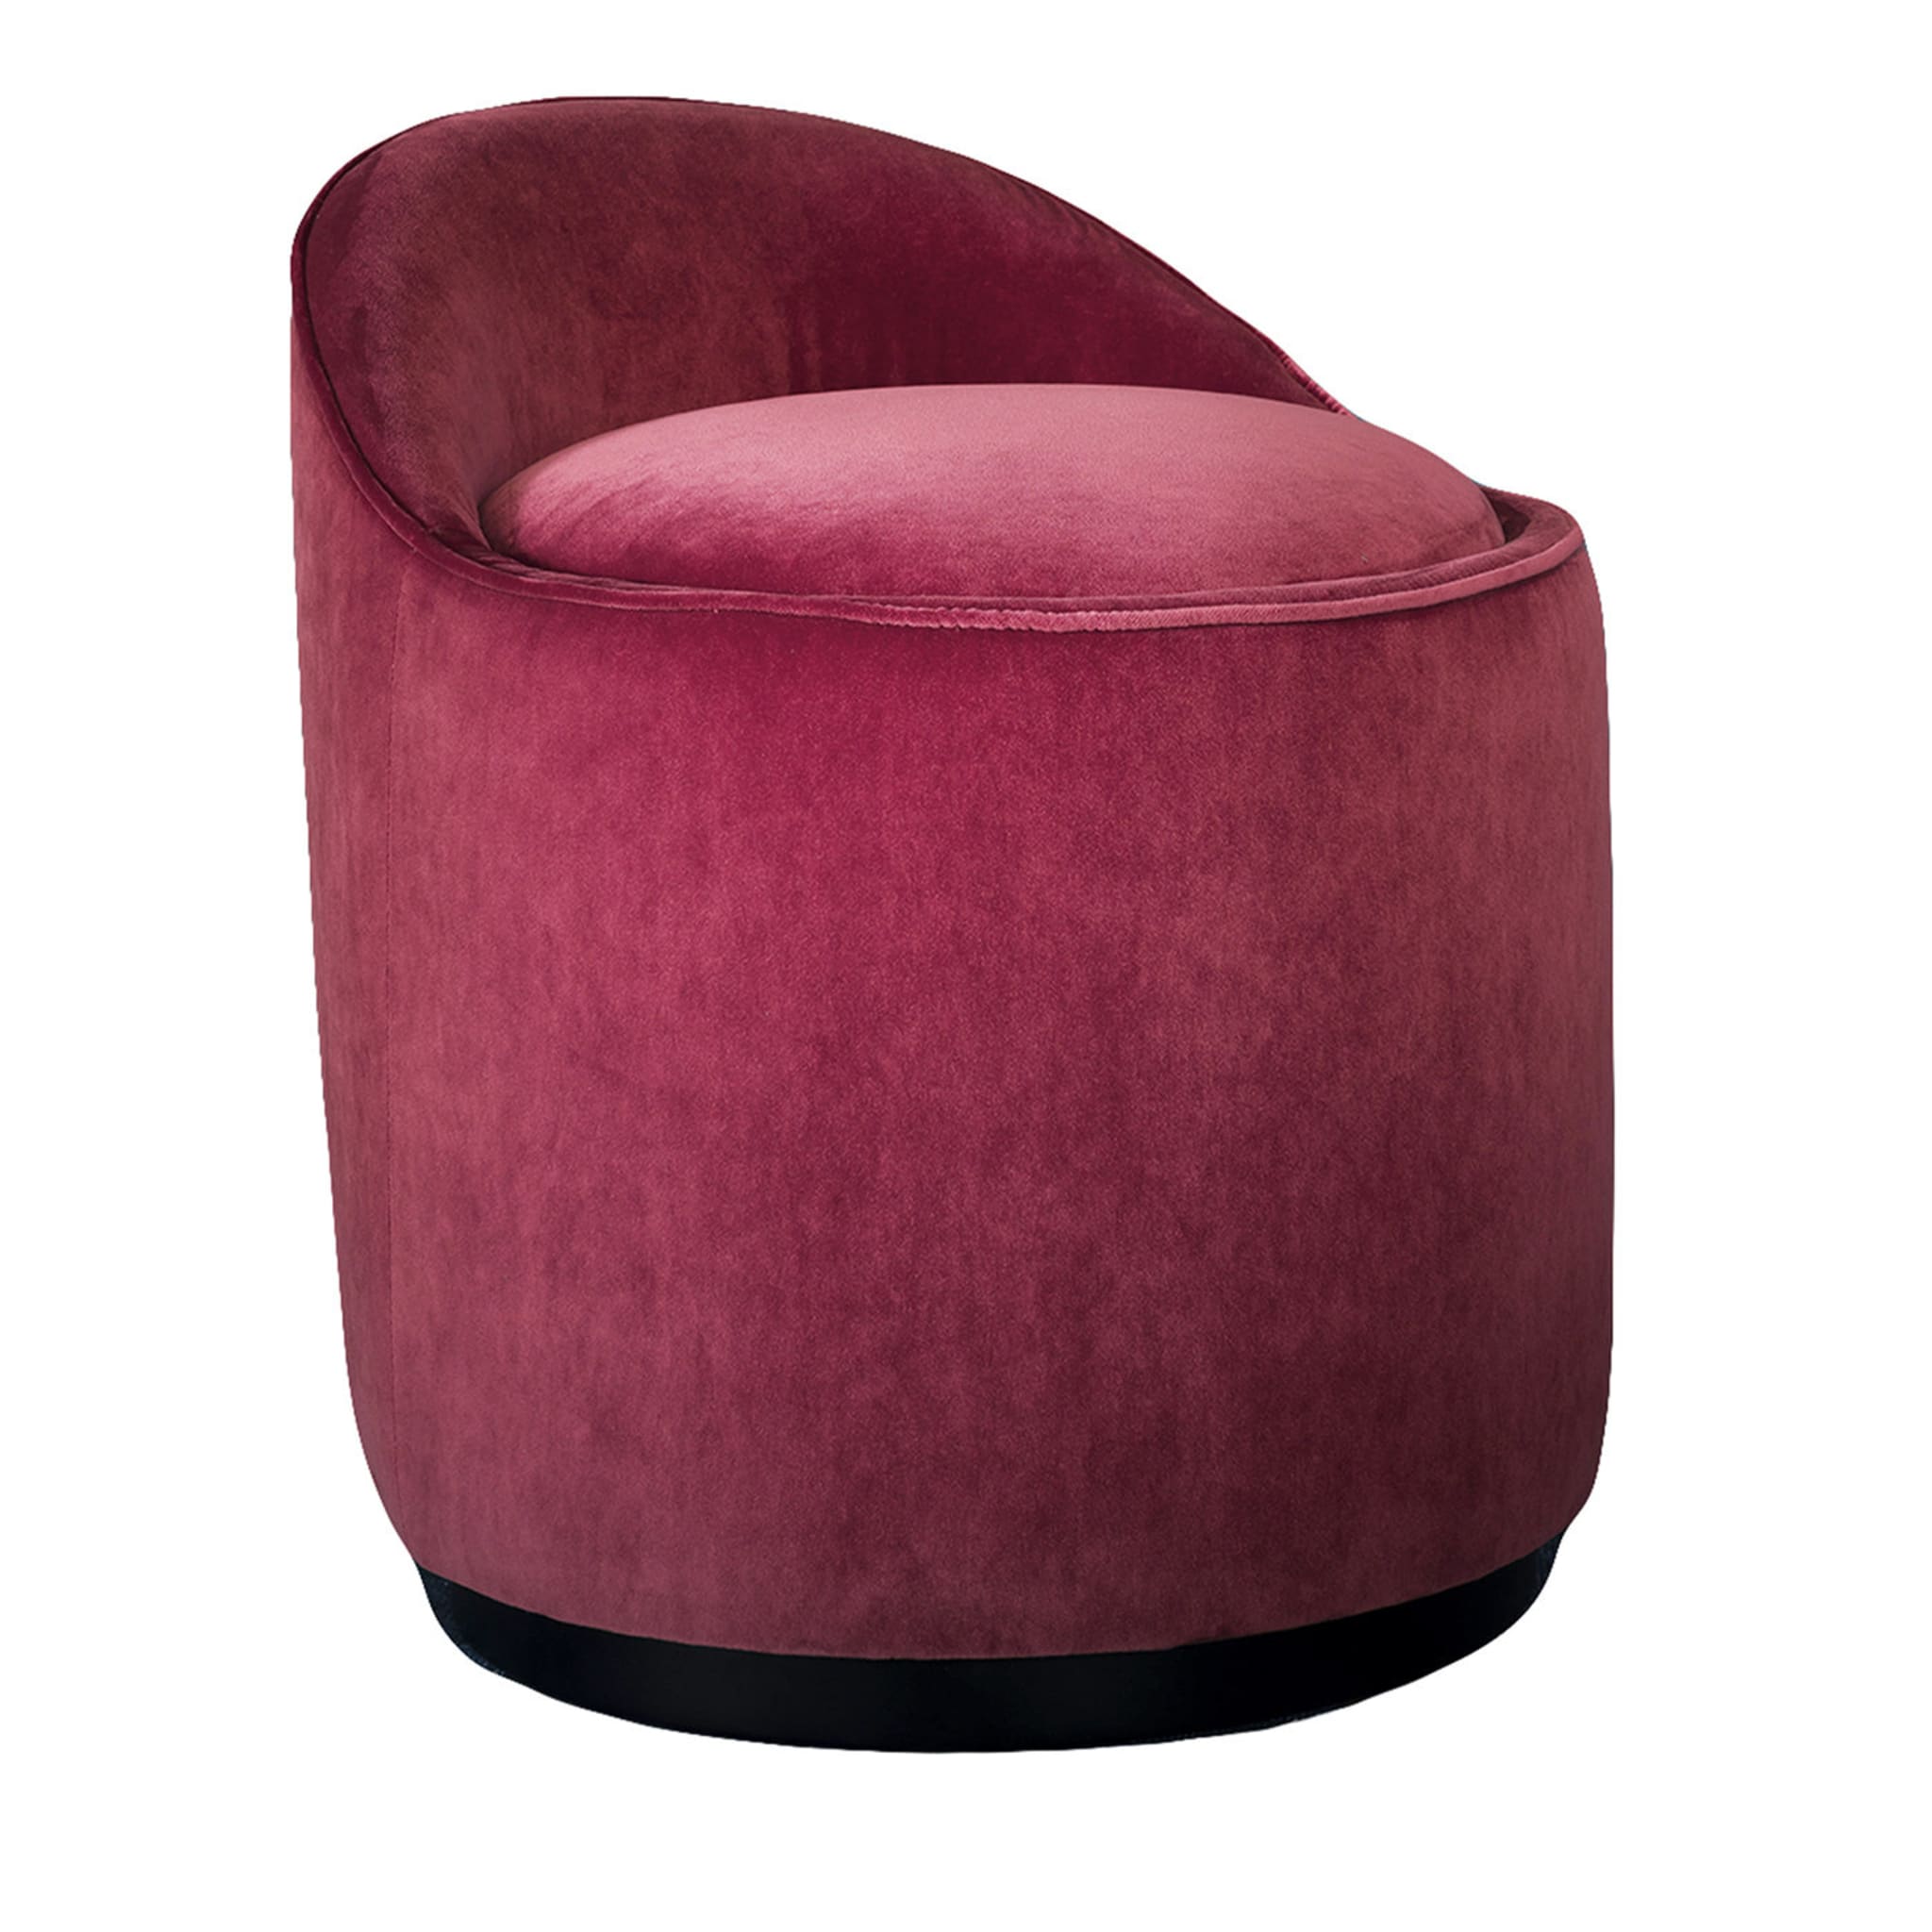 Elettra Red Pouf - Main view